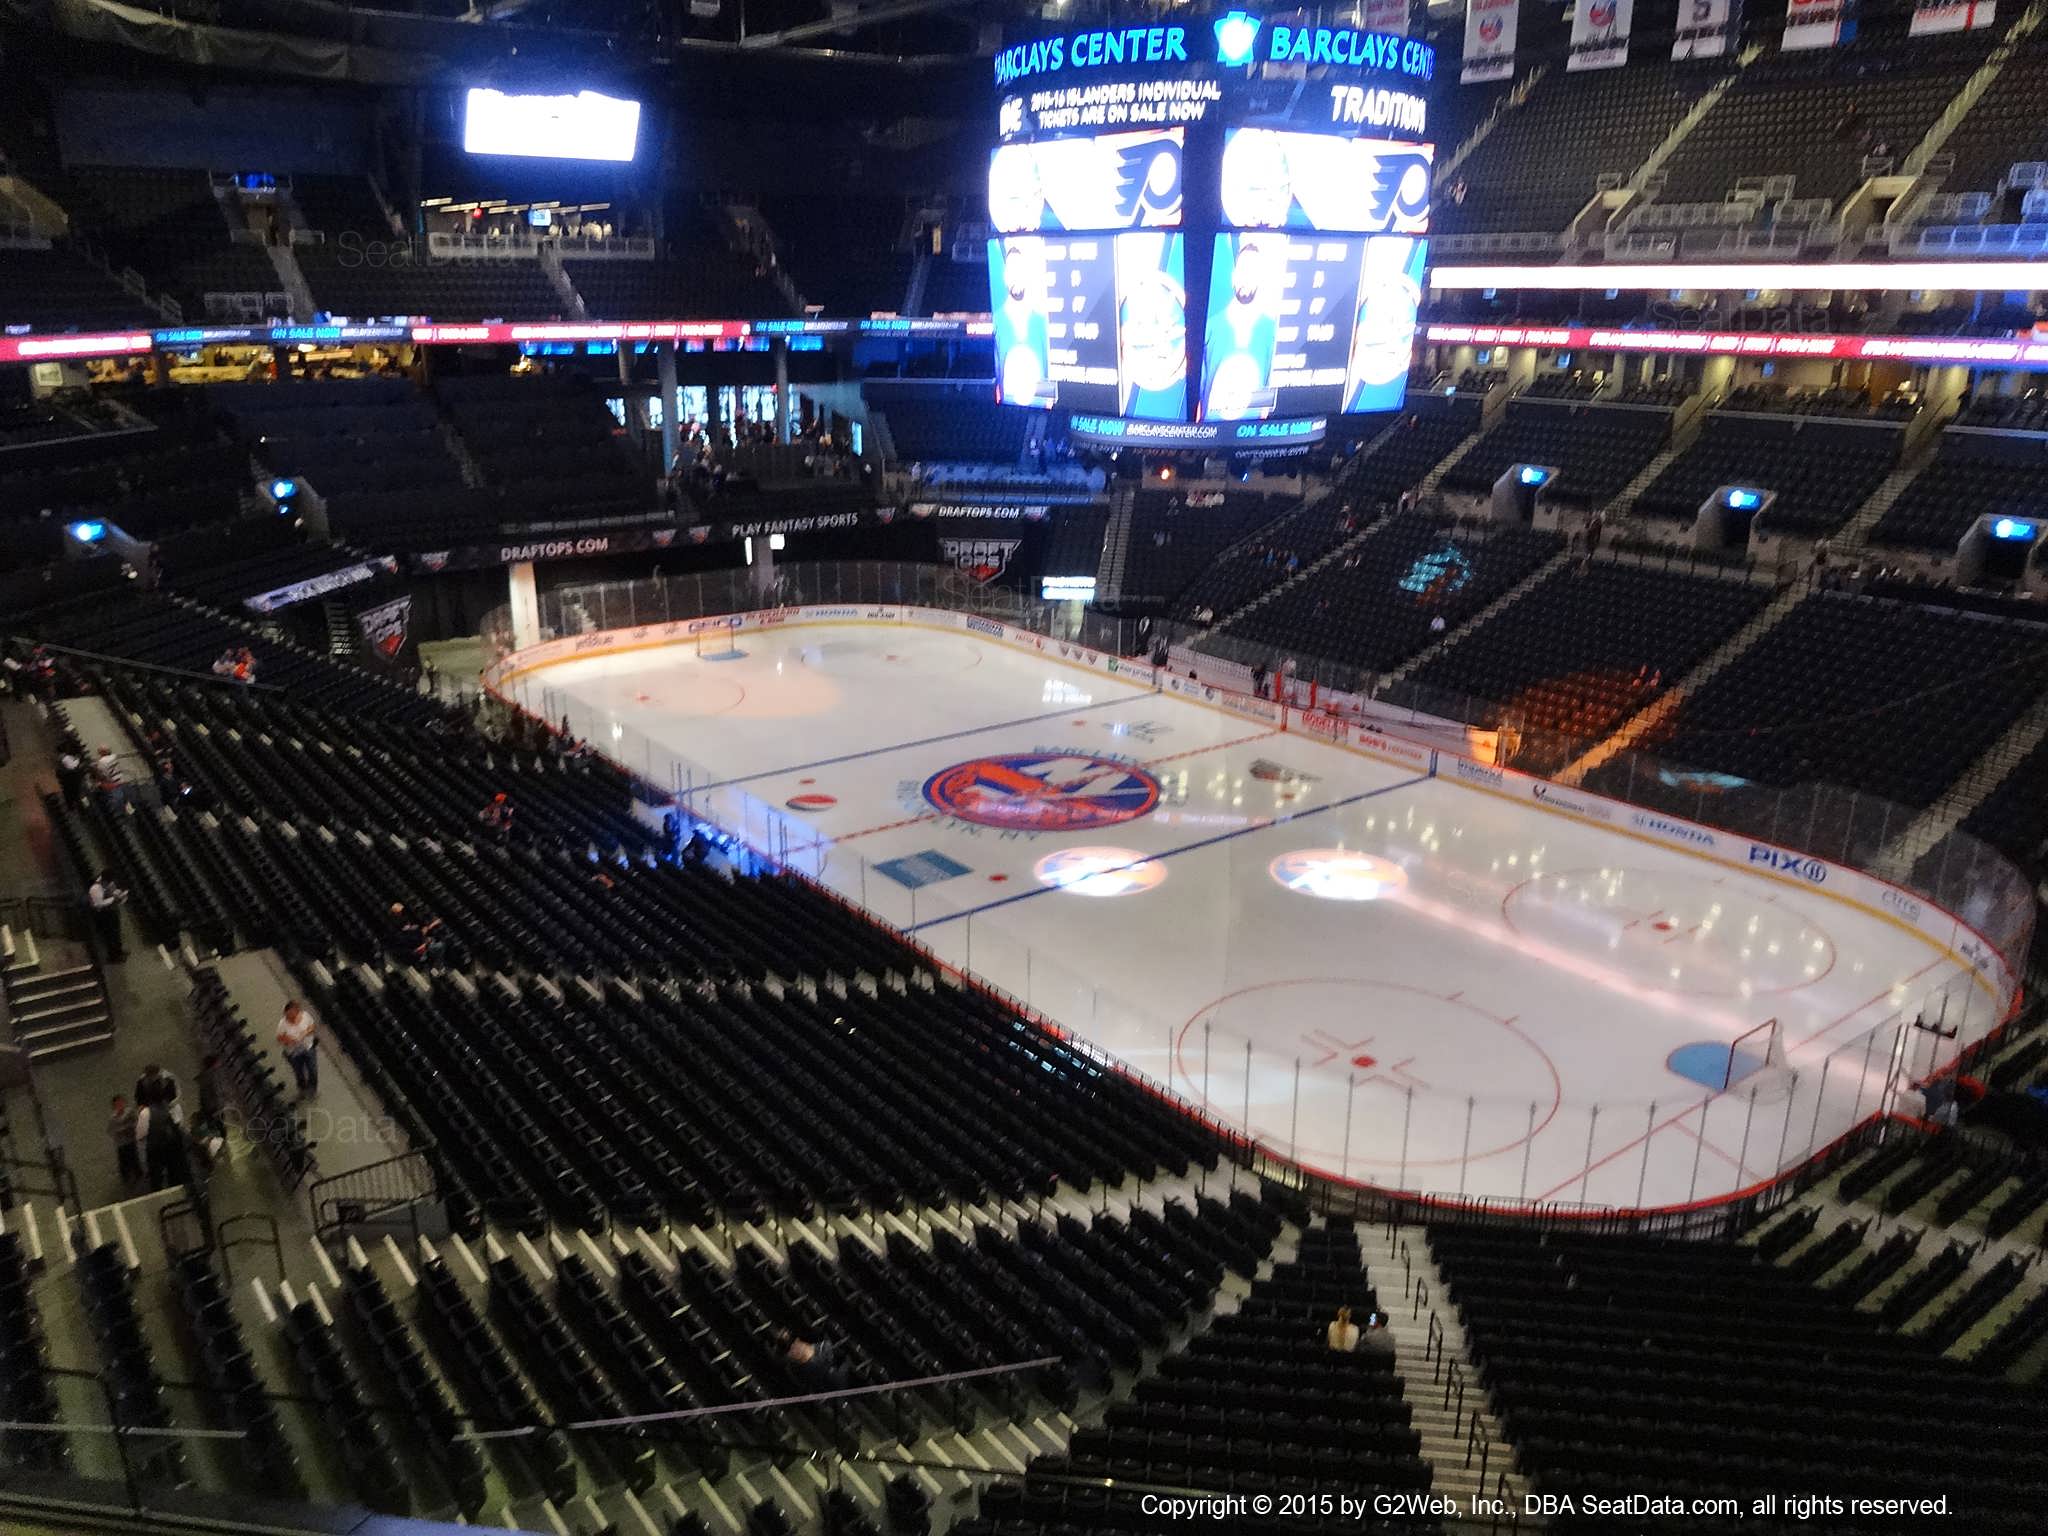 Seat View from Section 220 at the Barclays Center, home of the New York Islanders